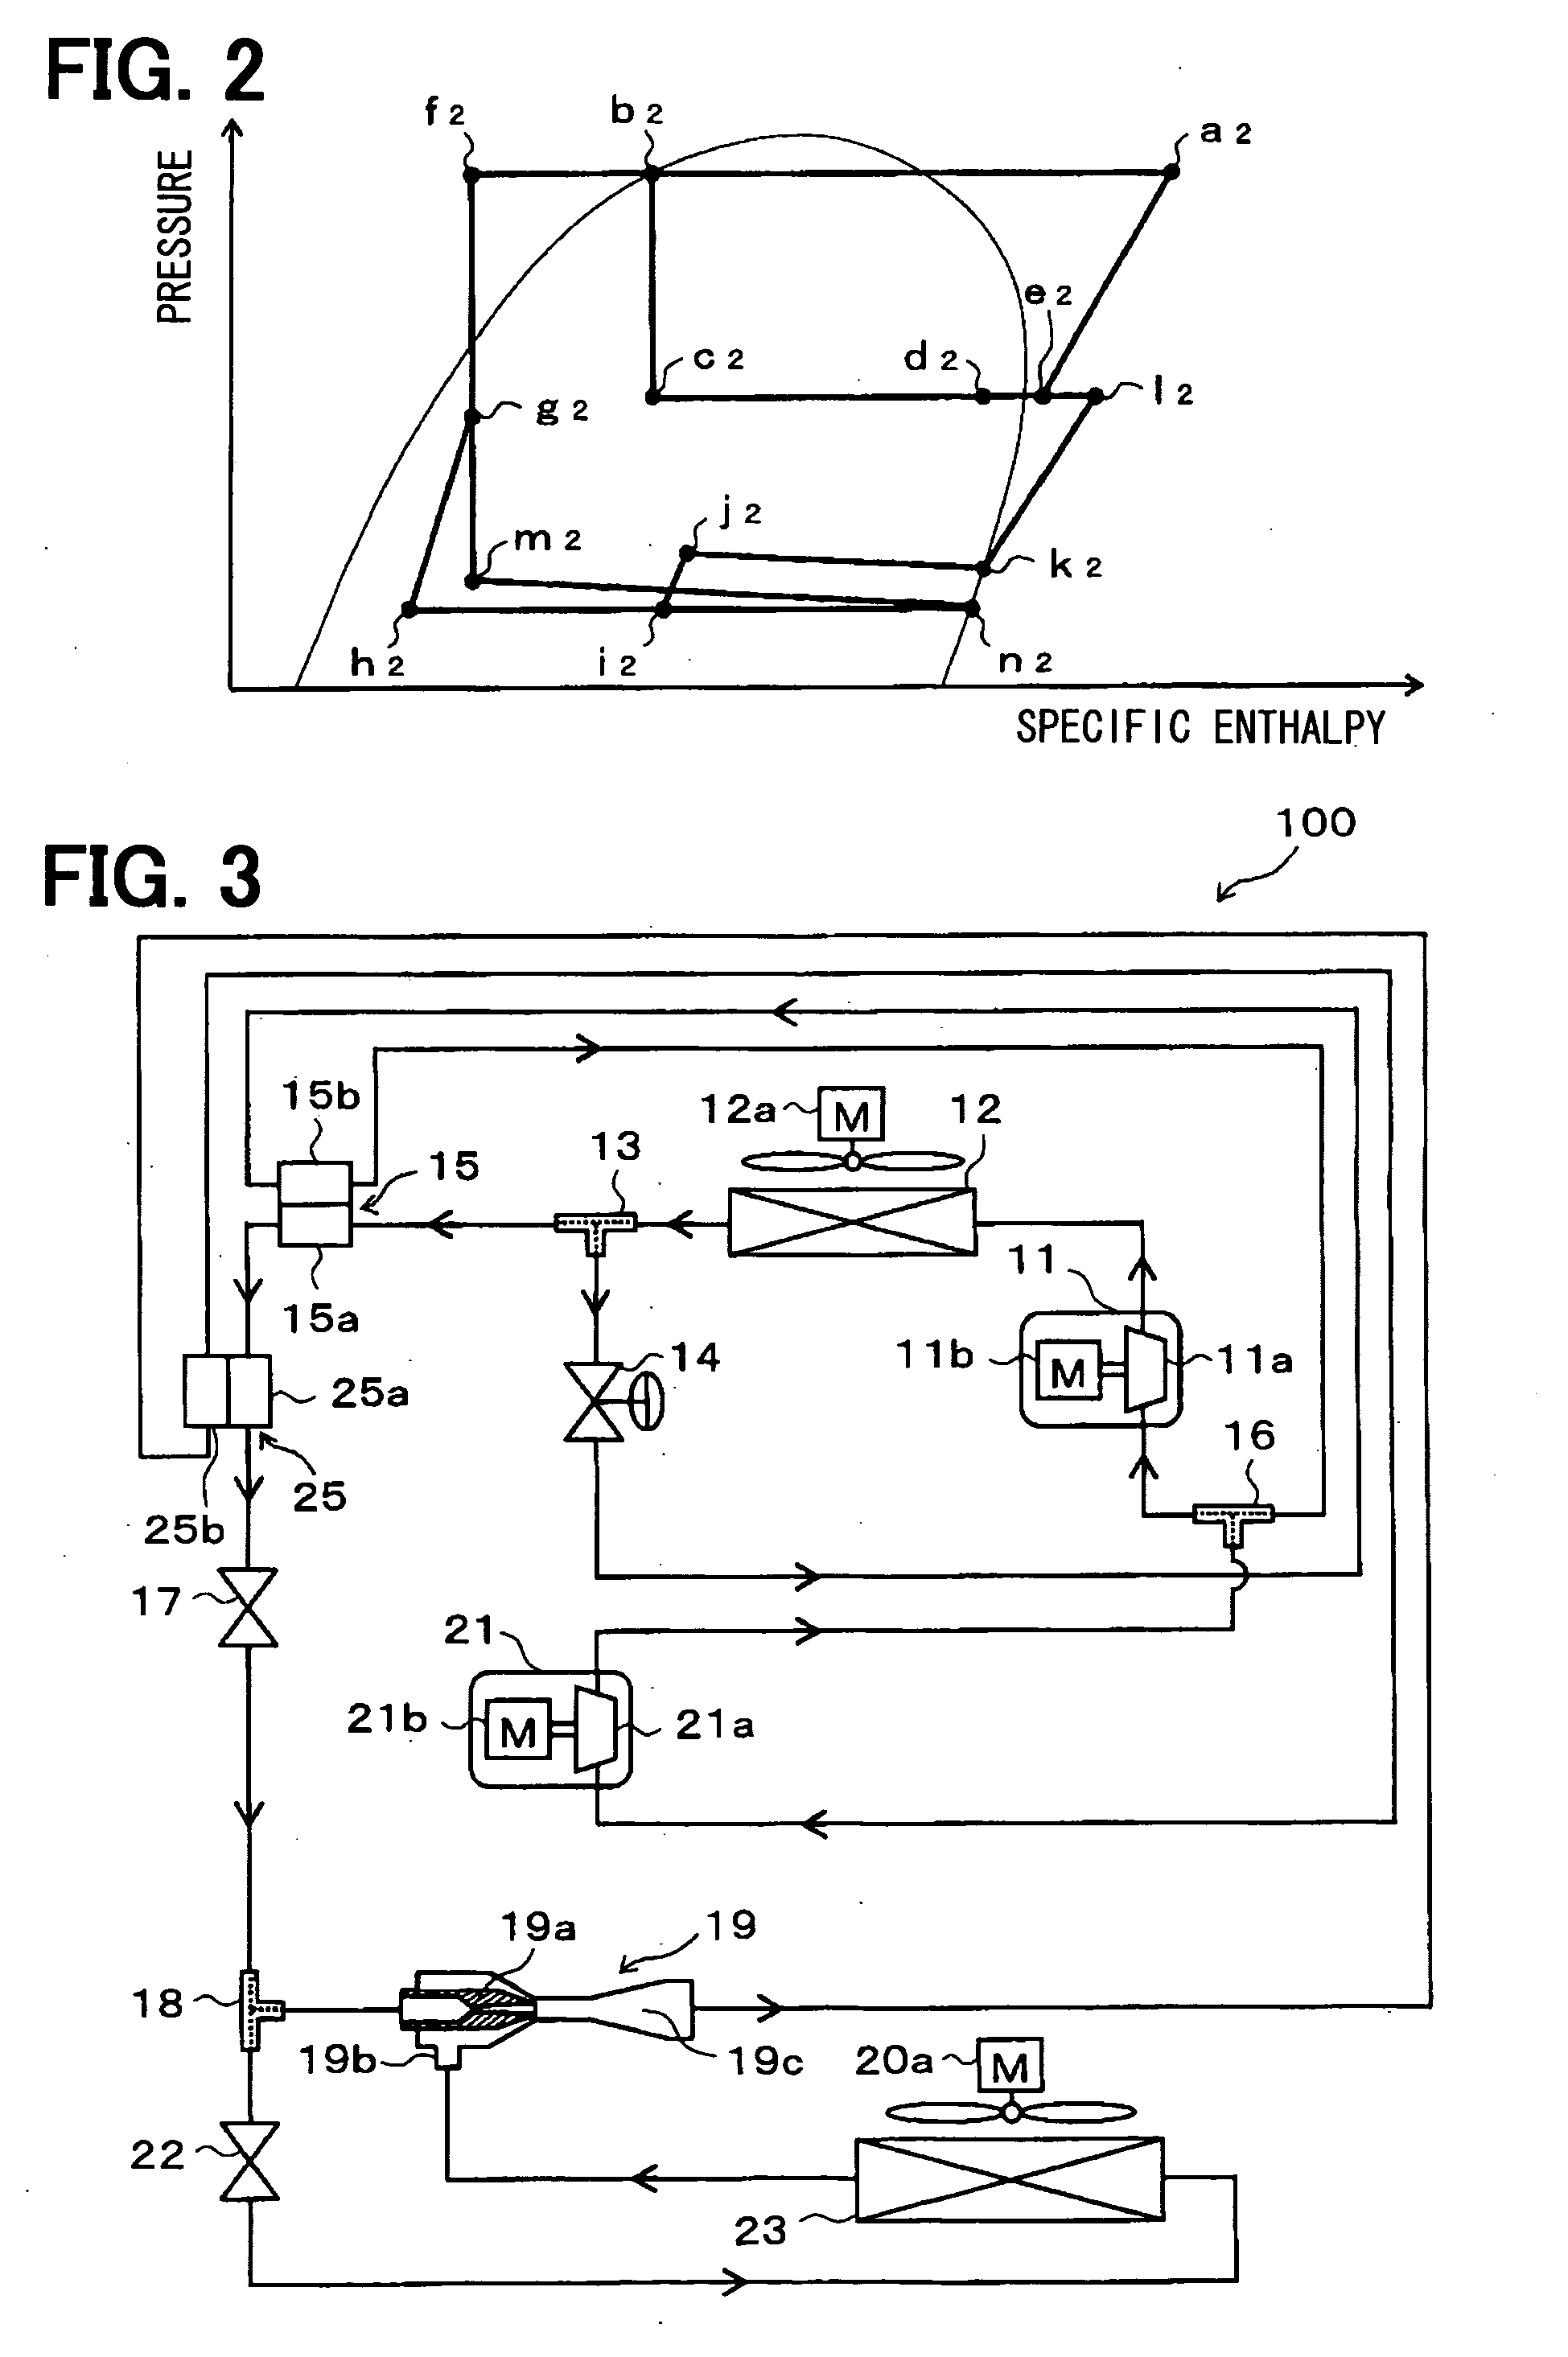 Ejector-type refrigerant cycle device